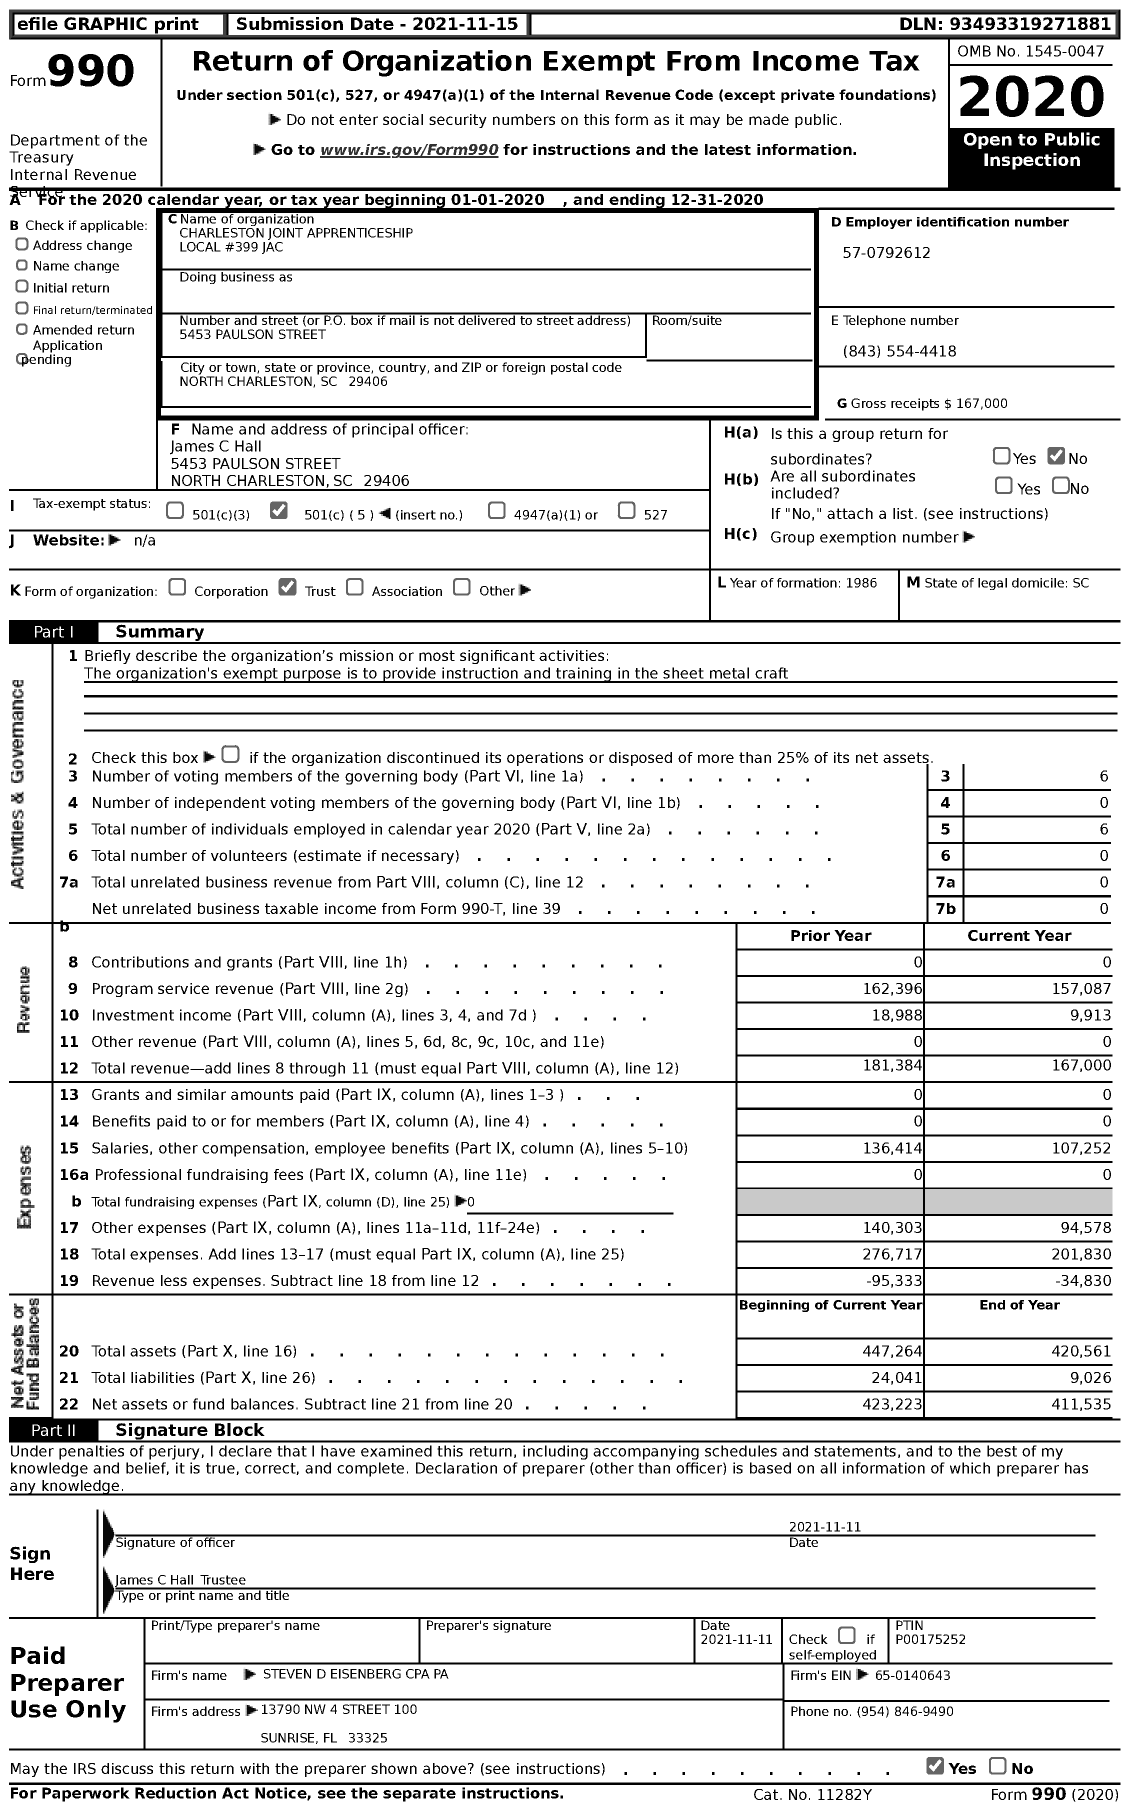 Image of first page of 2020 Form 990 for Charleston Joint Apprenticeship Local 399 Jac